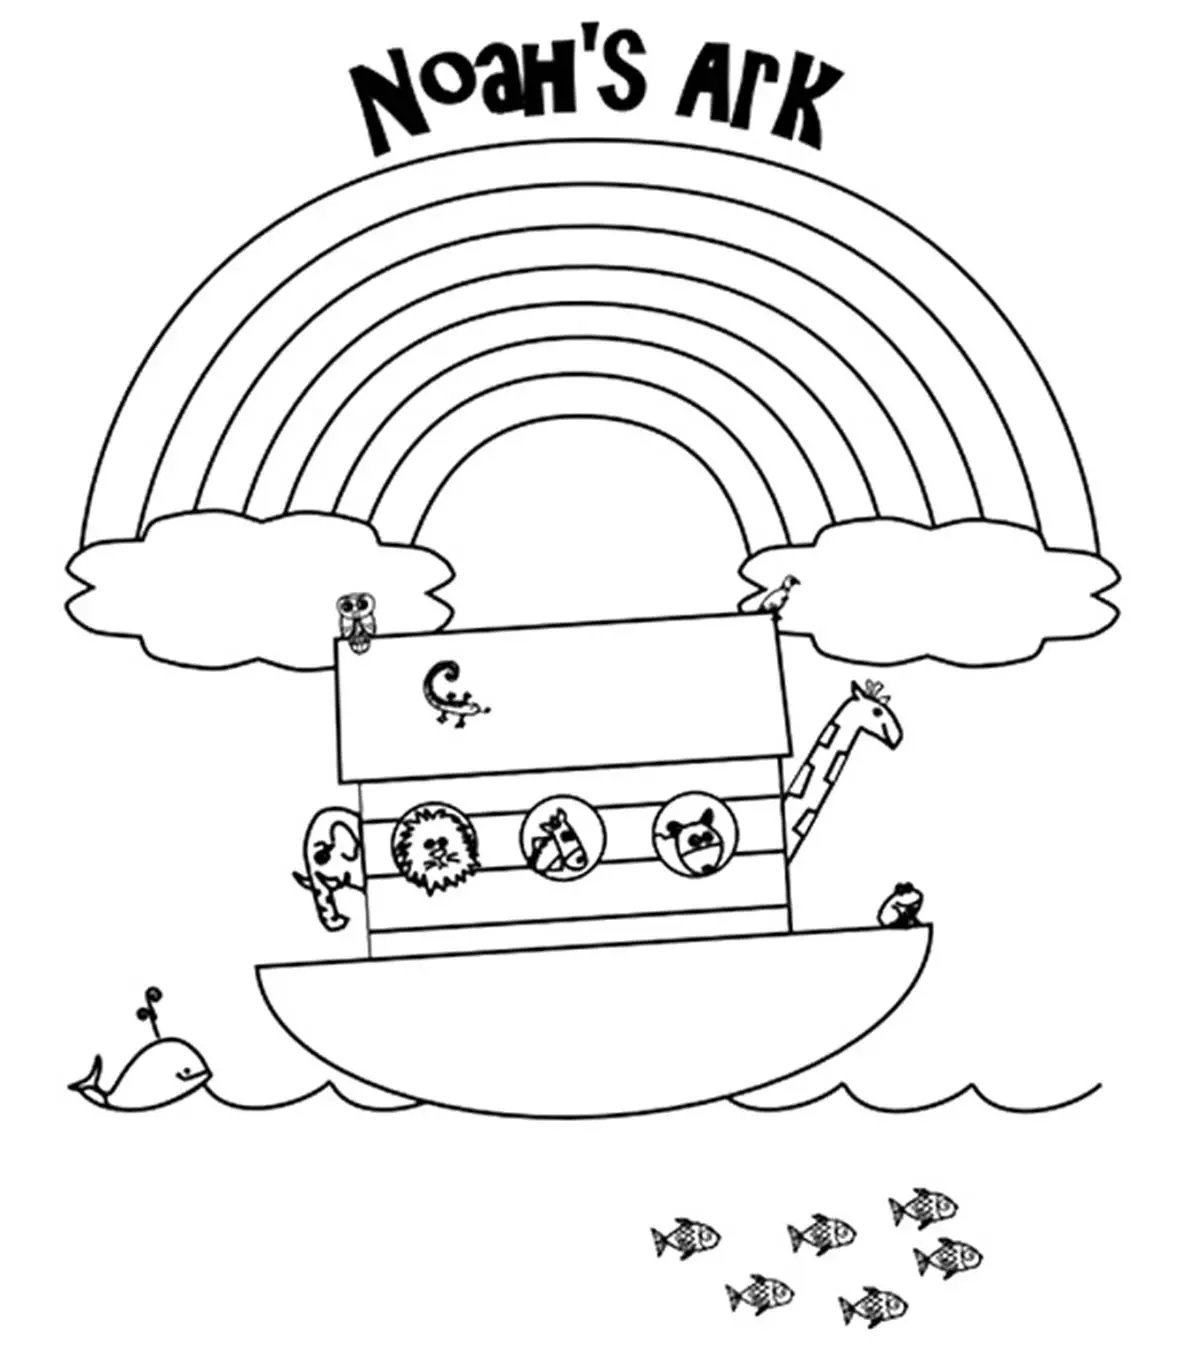 Top 10 'Noah And The Ark' Coloring Pages Your Toddler Will Love To Color